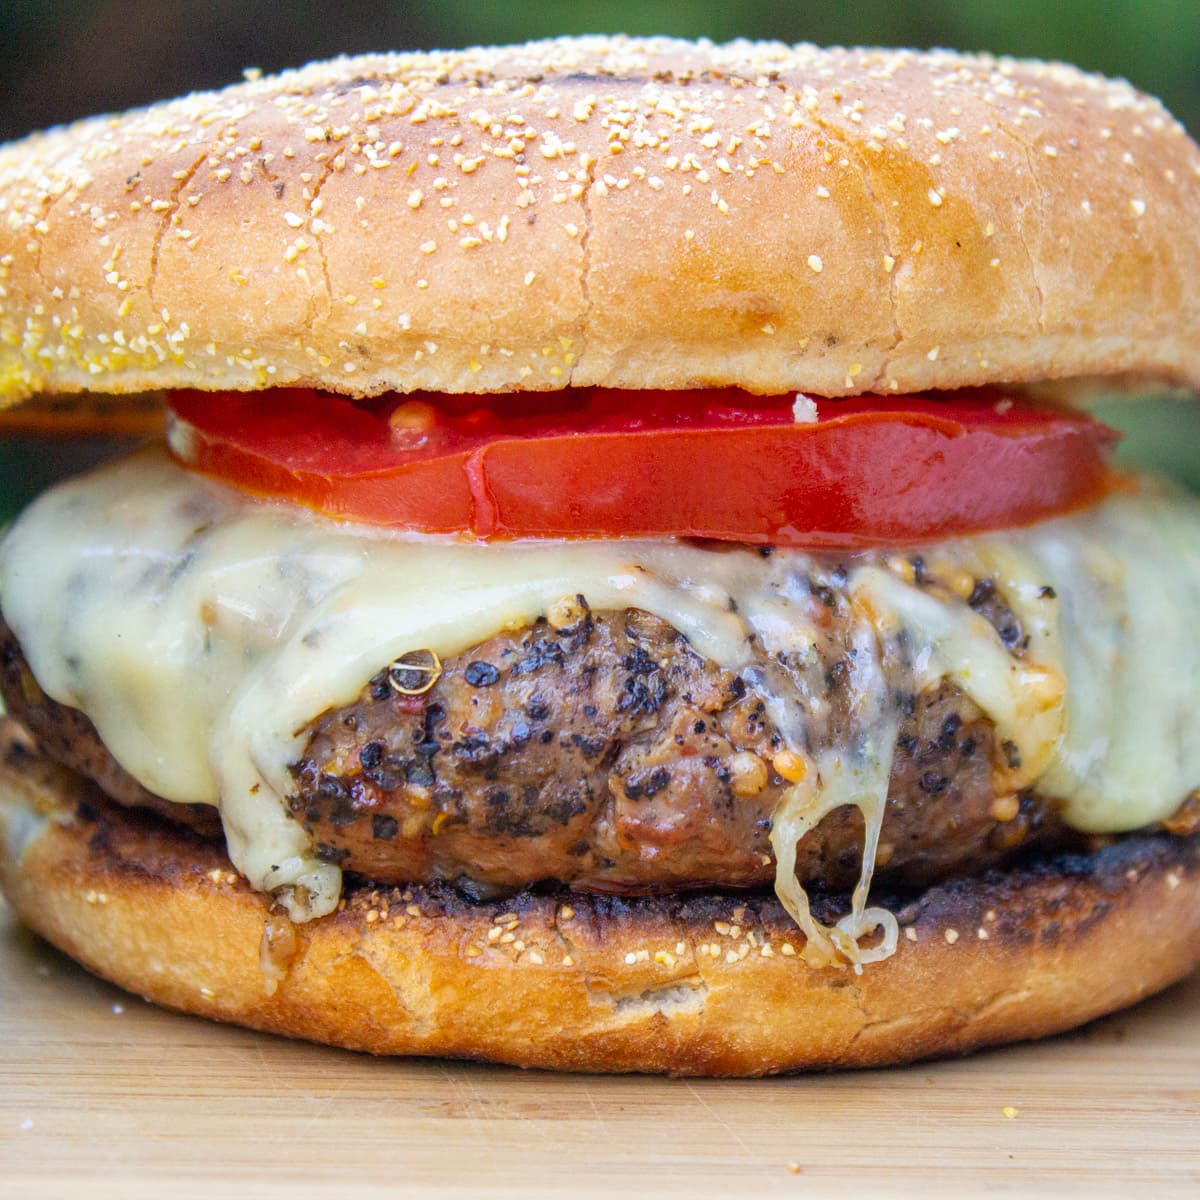 burger topped with cheese and tomato in bun.